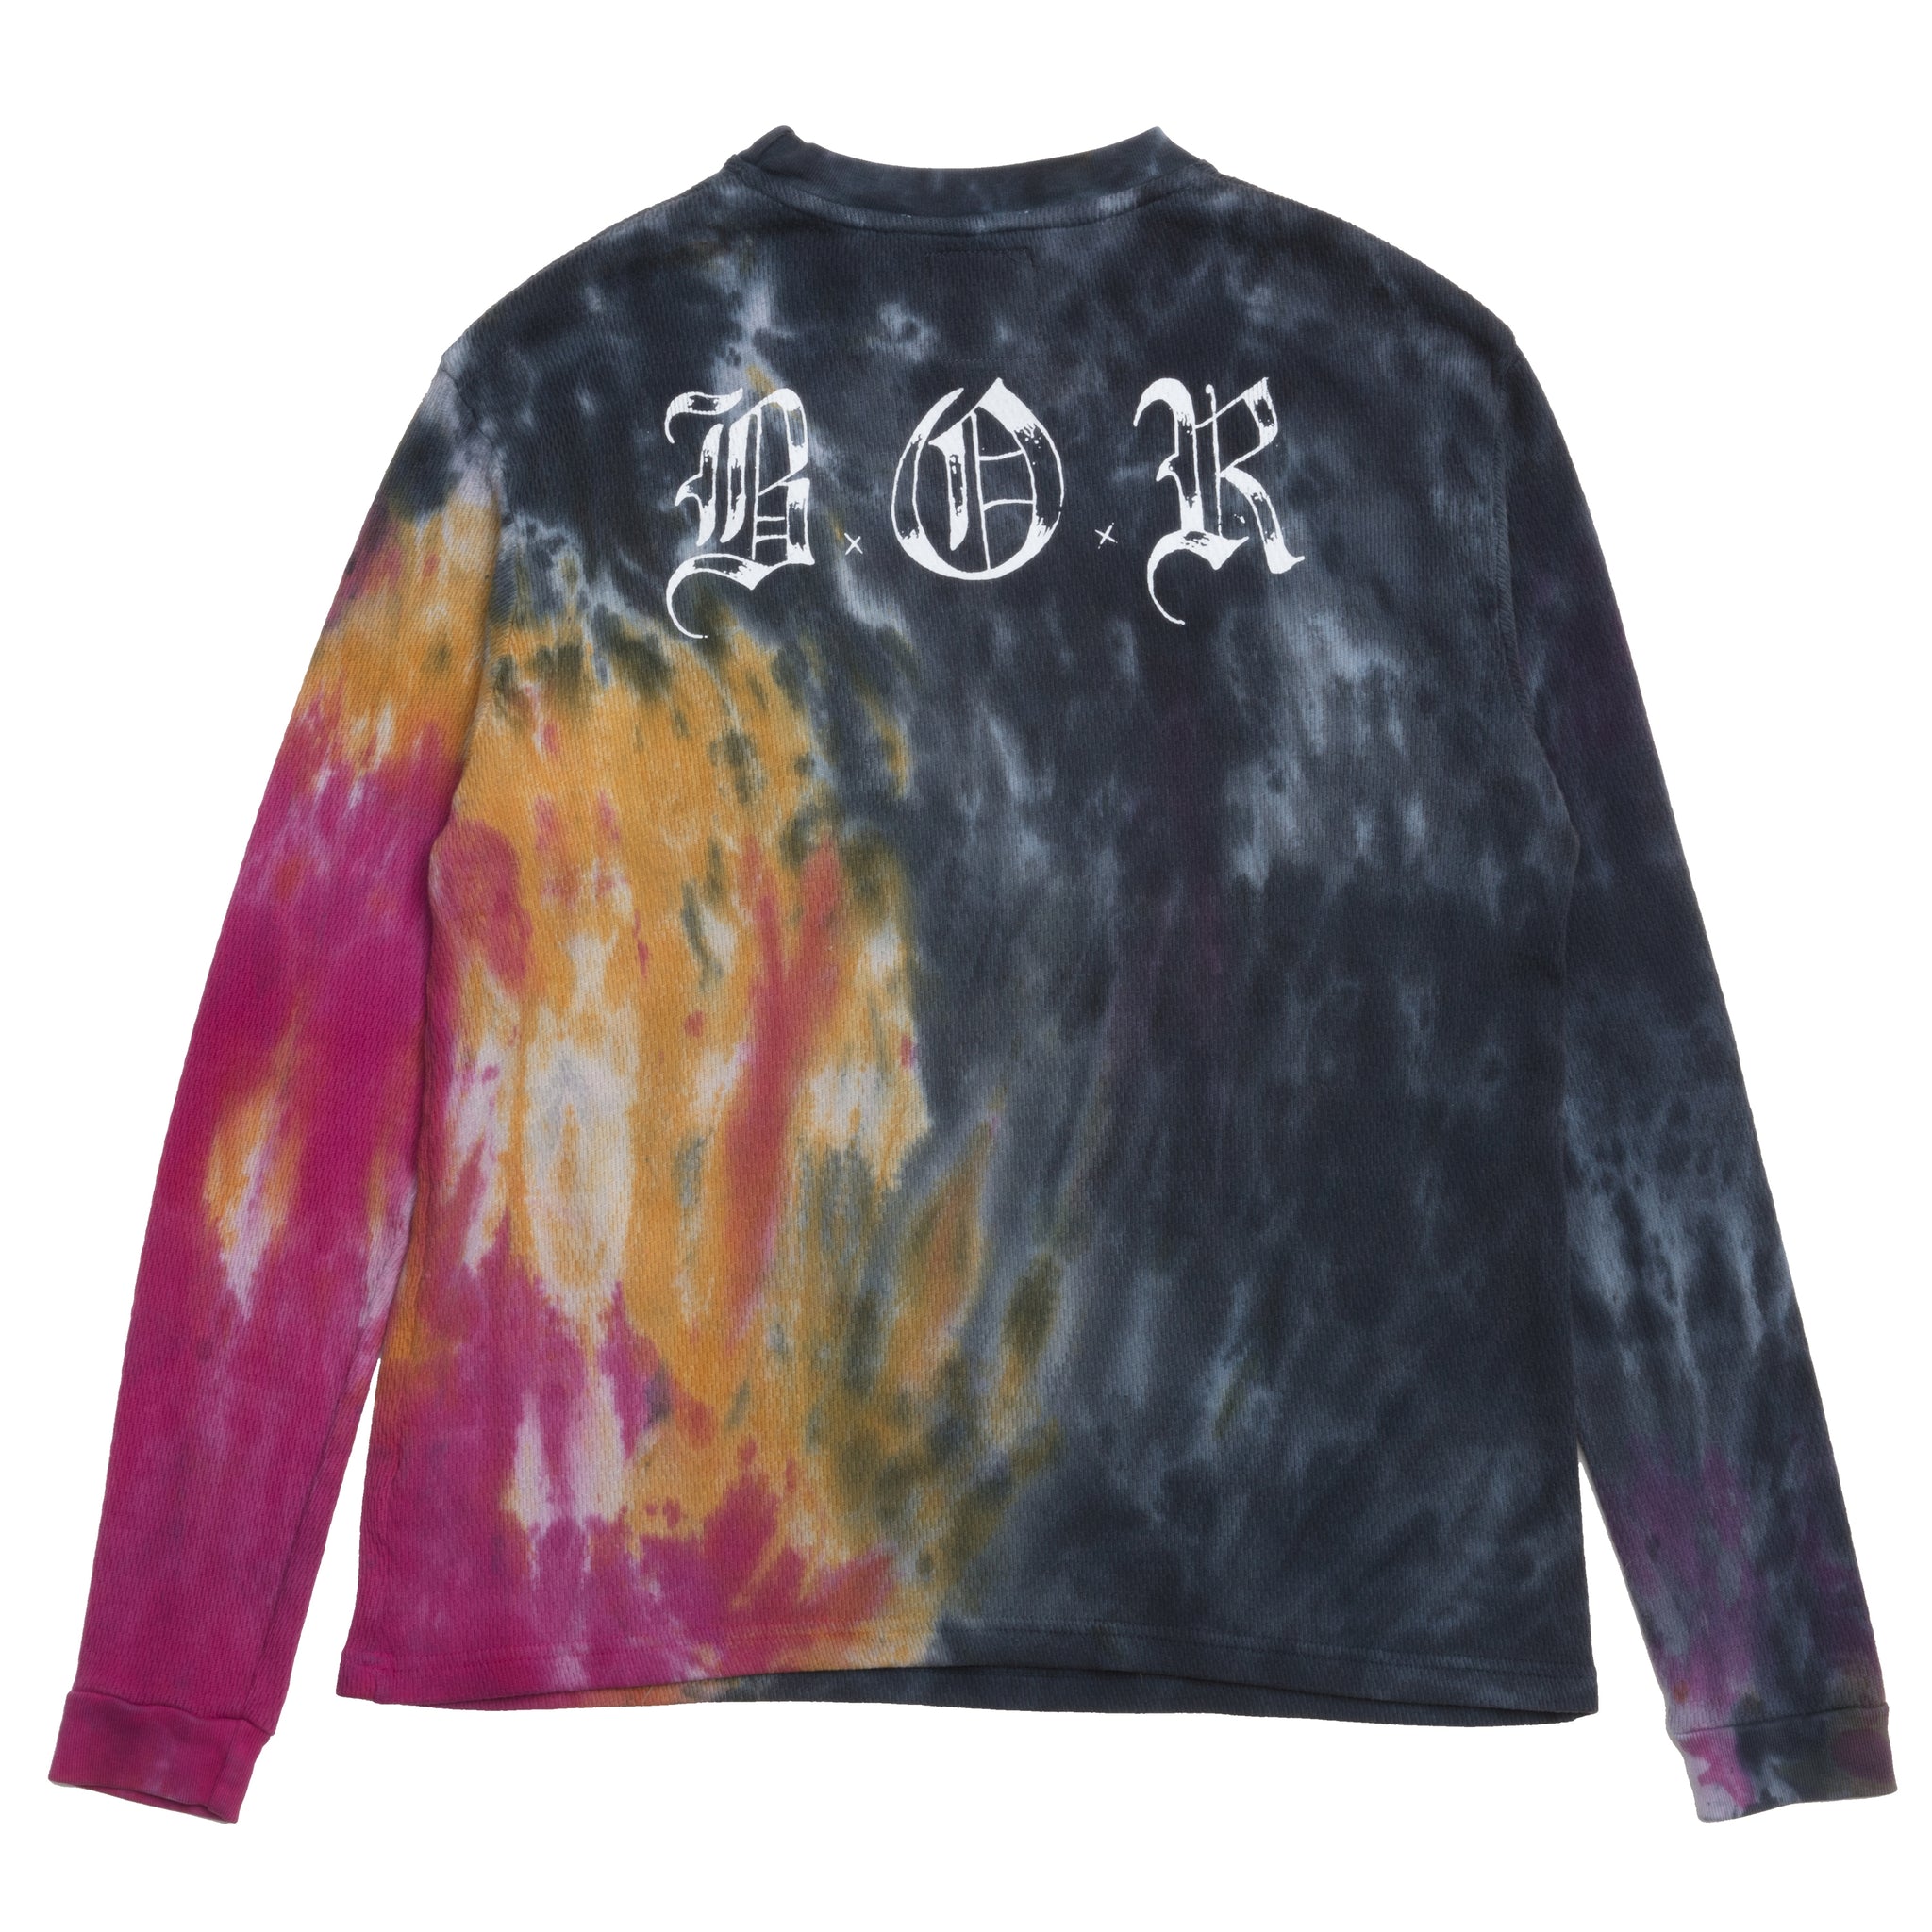 SANTERIA HAND DYED THERMAL LONG SLEEVE T-SHIRT